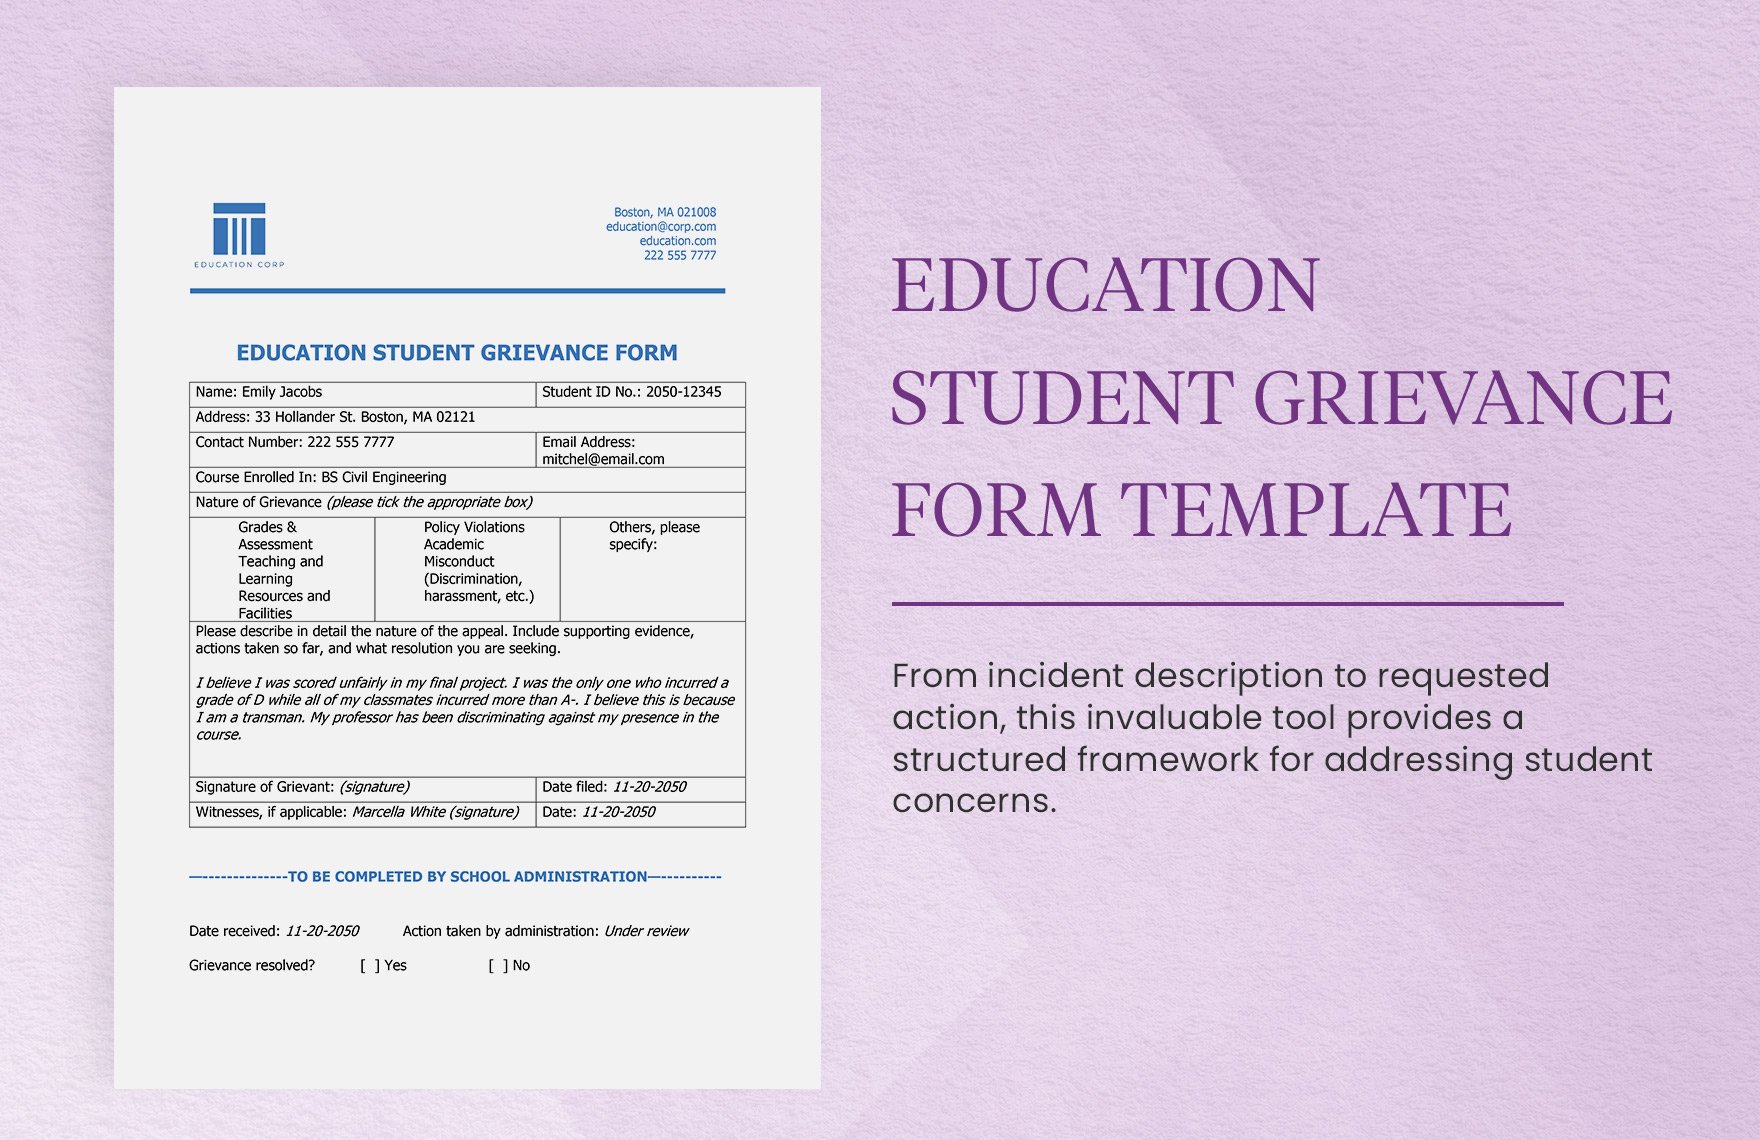 Education Student Grievance Form Template